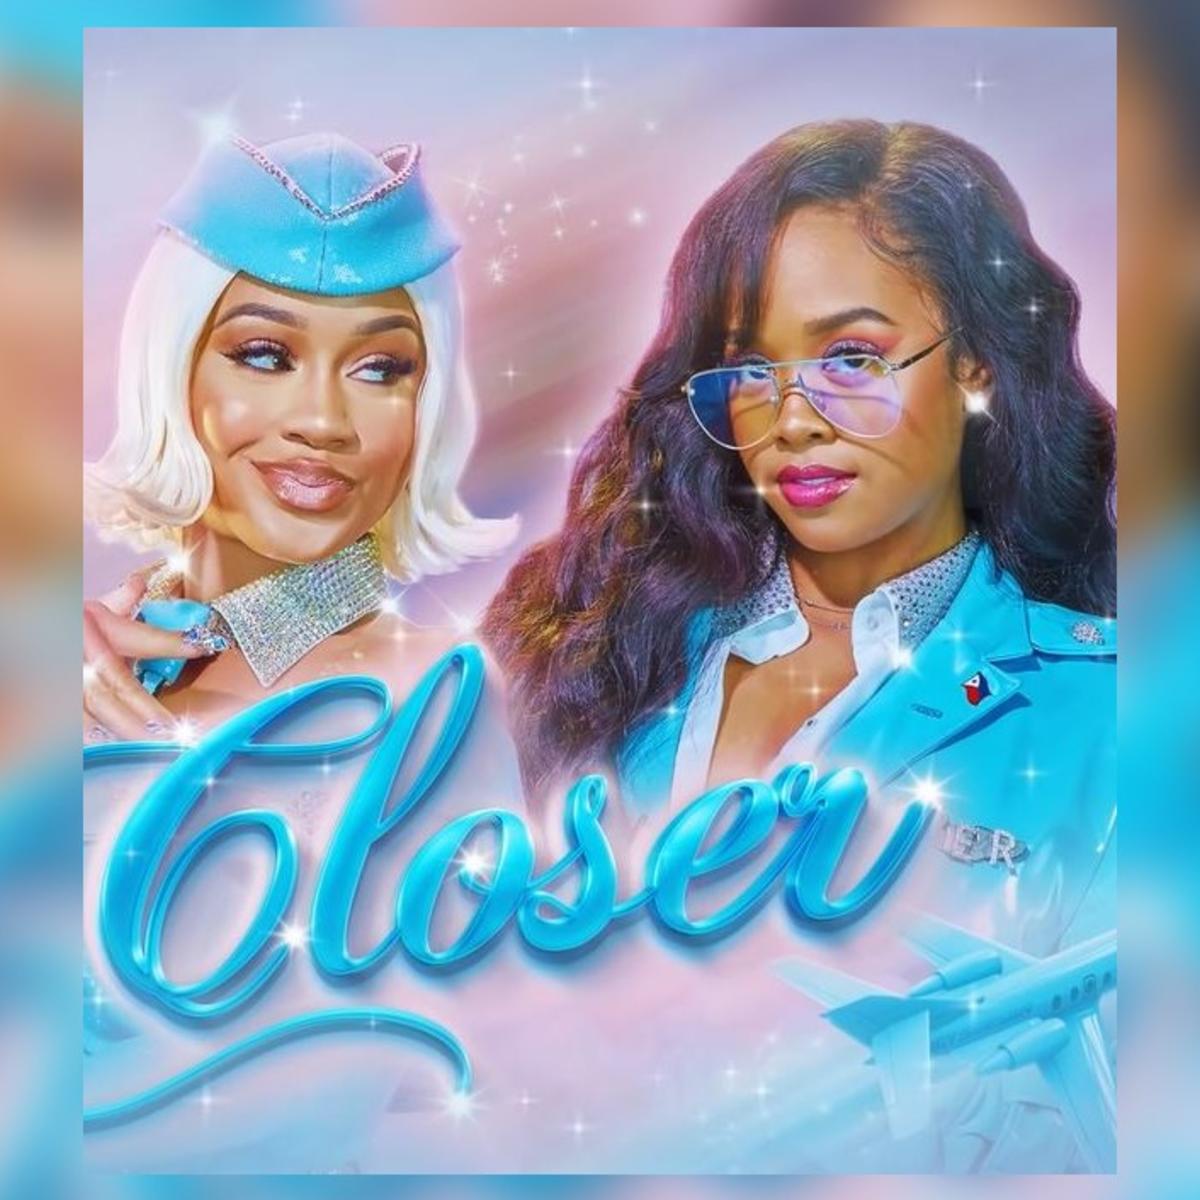 Saweetie & H.E.R. Are Sizzling In “Closer”